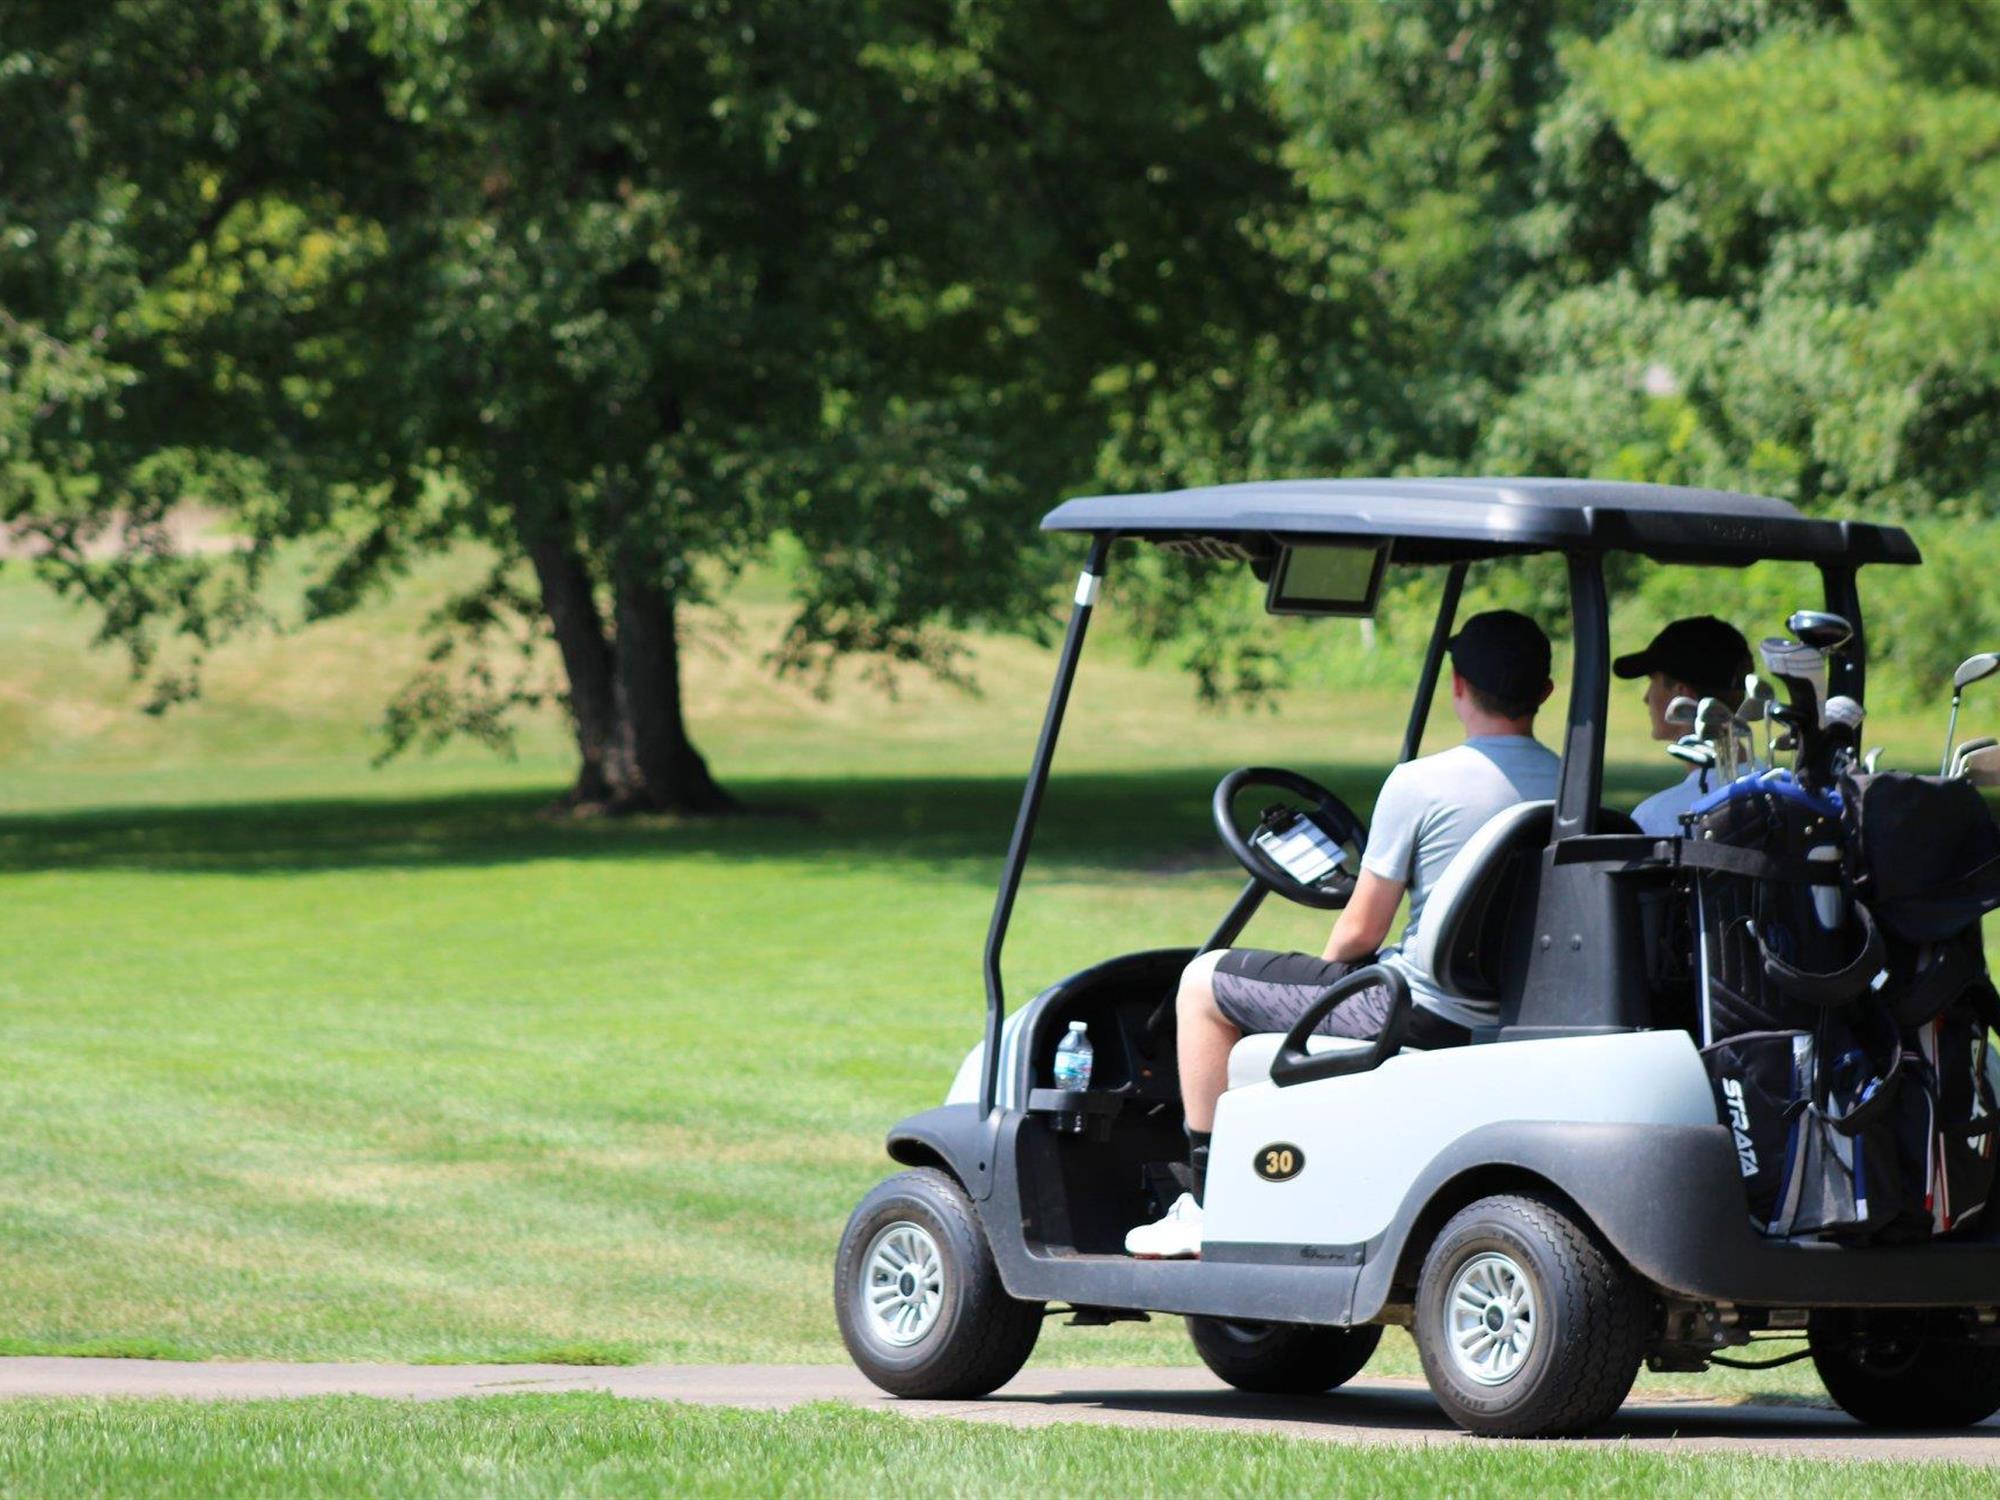 Brand new, electric golf carts with built in GPS!